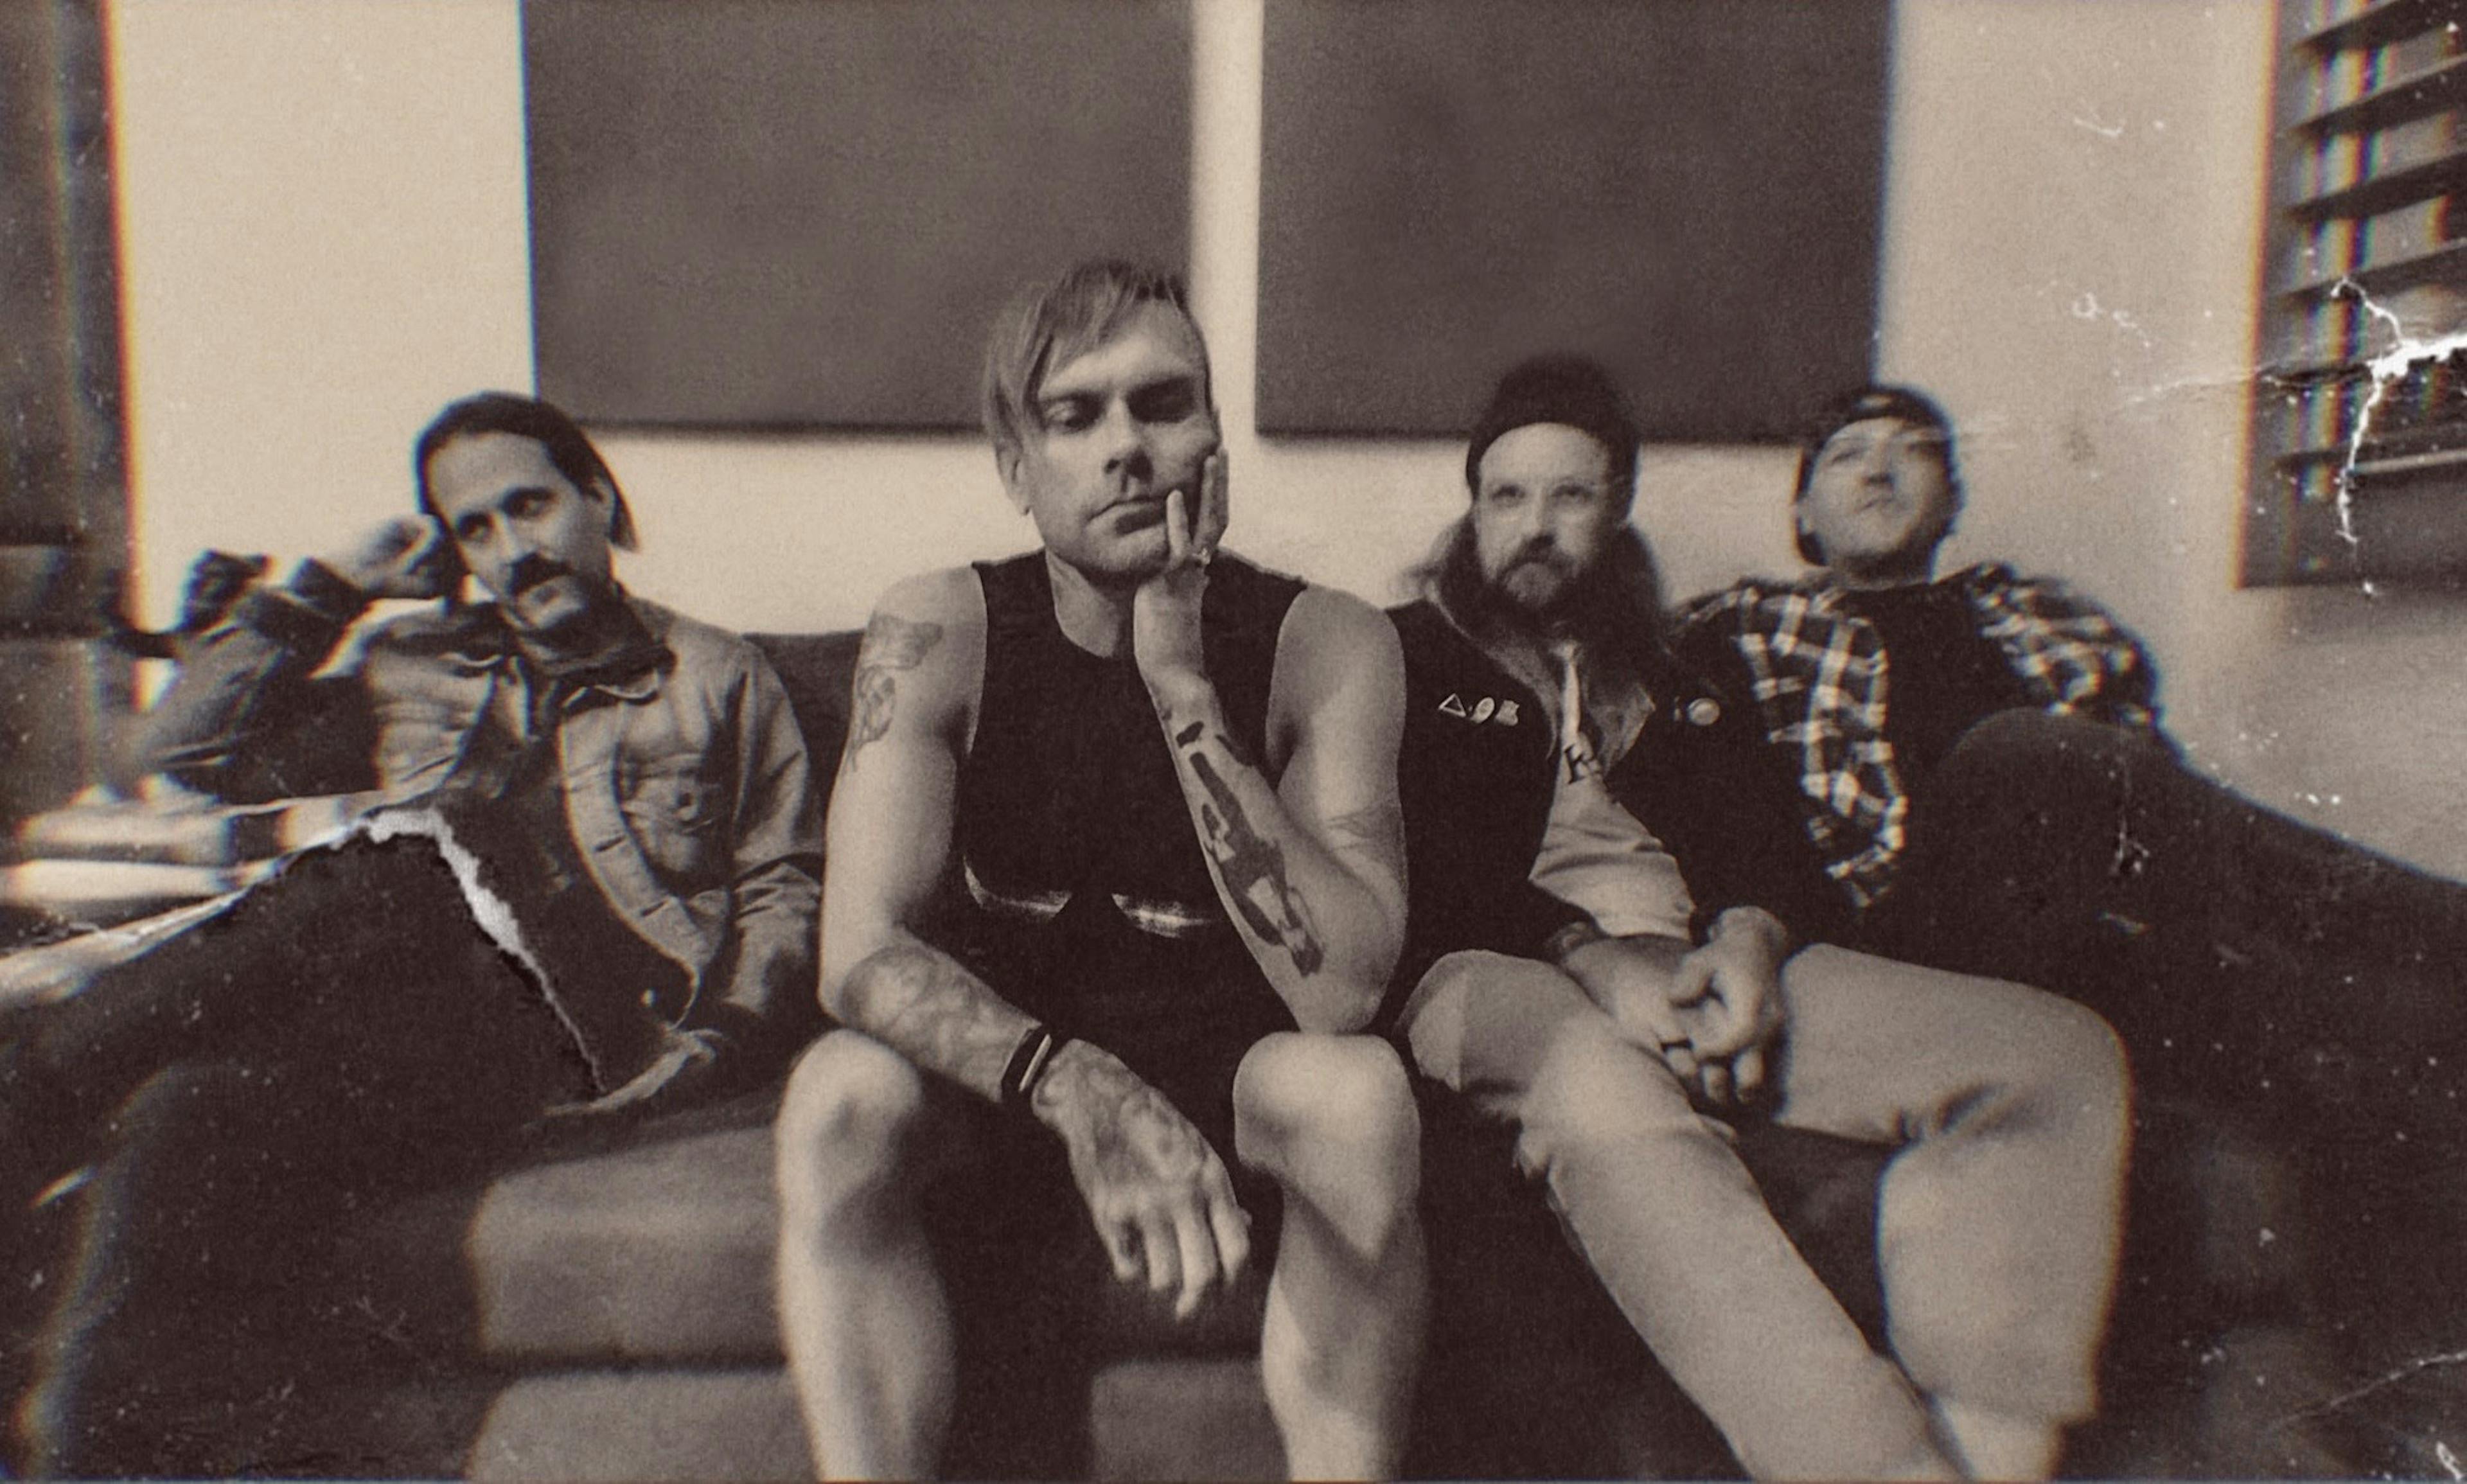 The Used Have Announced Their New Album, Heartwork